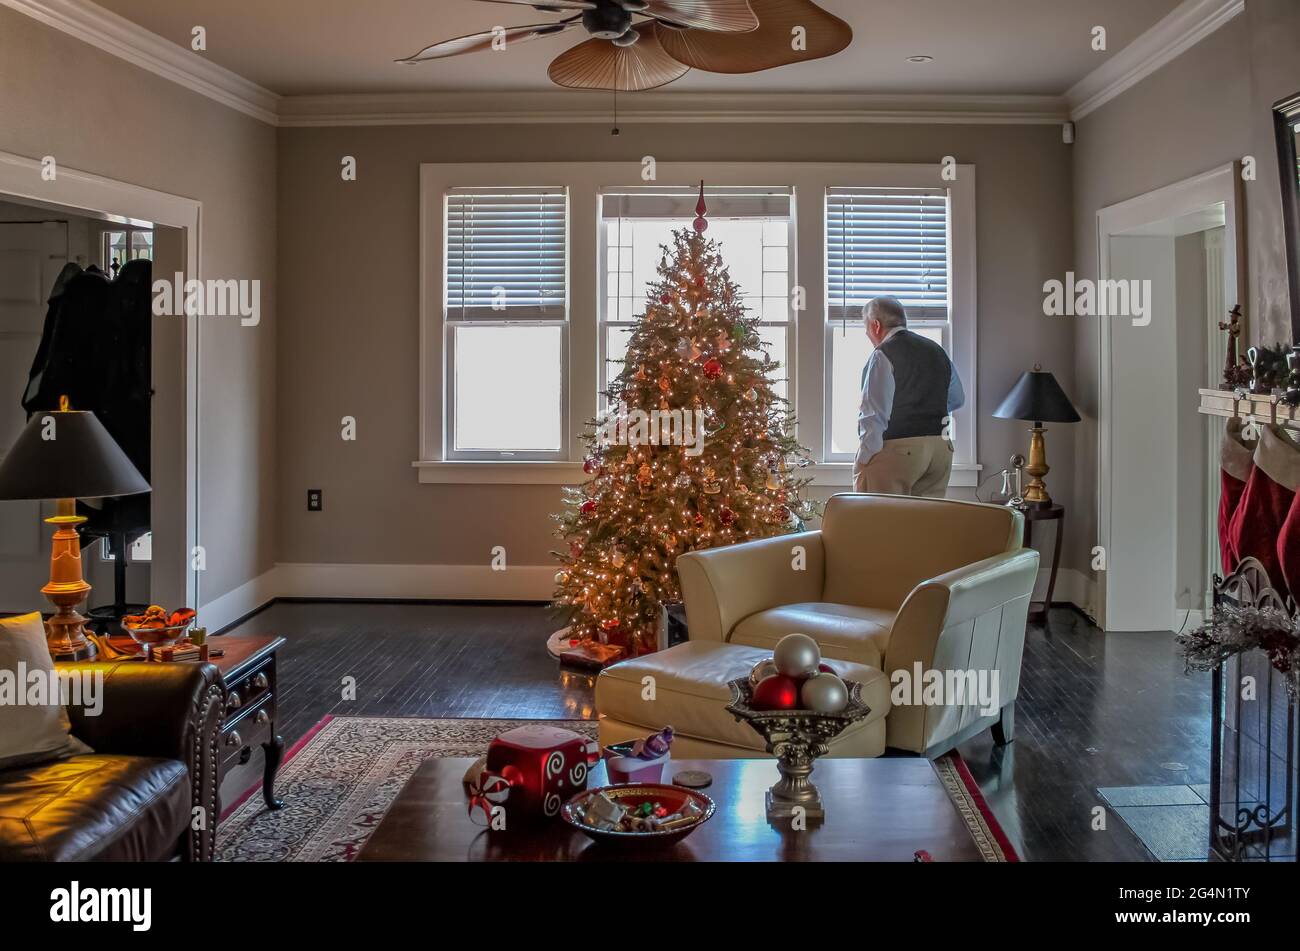 Inside elegant home decorated for Christmas with tree and stockings an older man looks out window Stock Photo